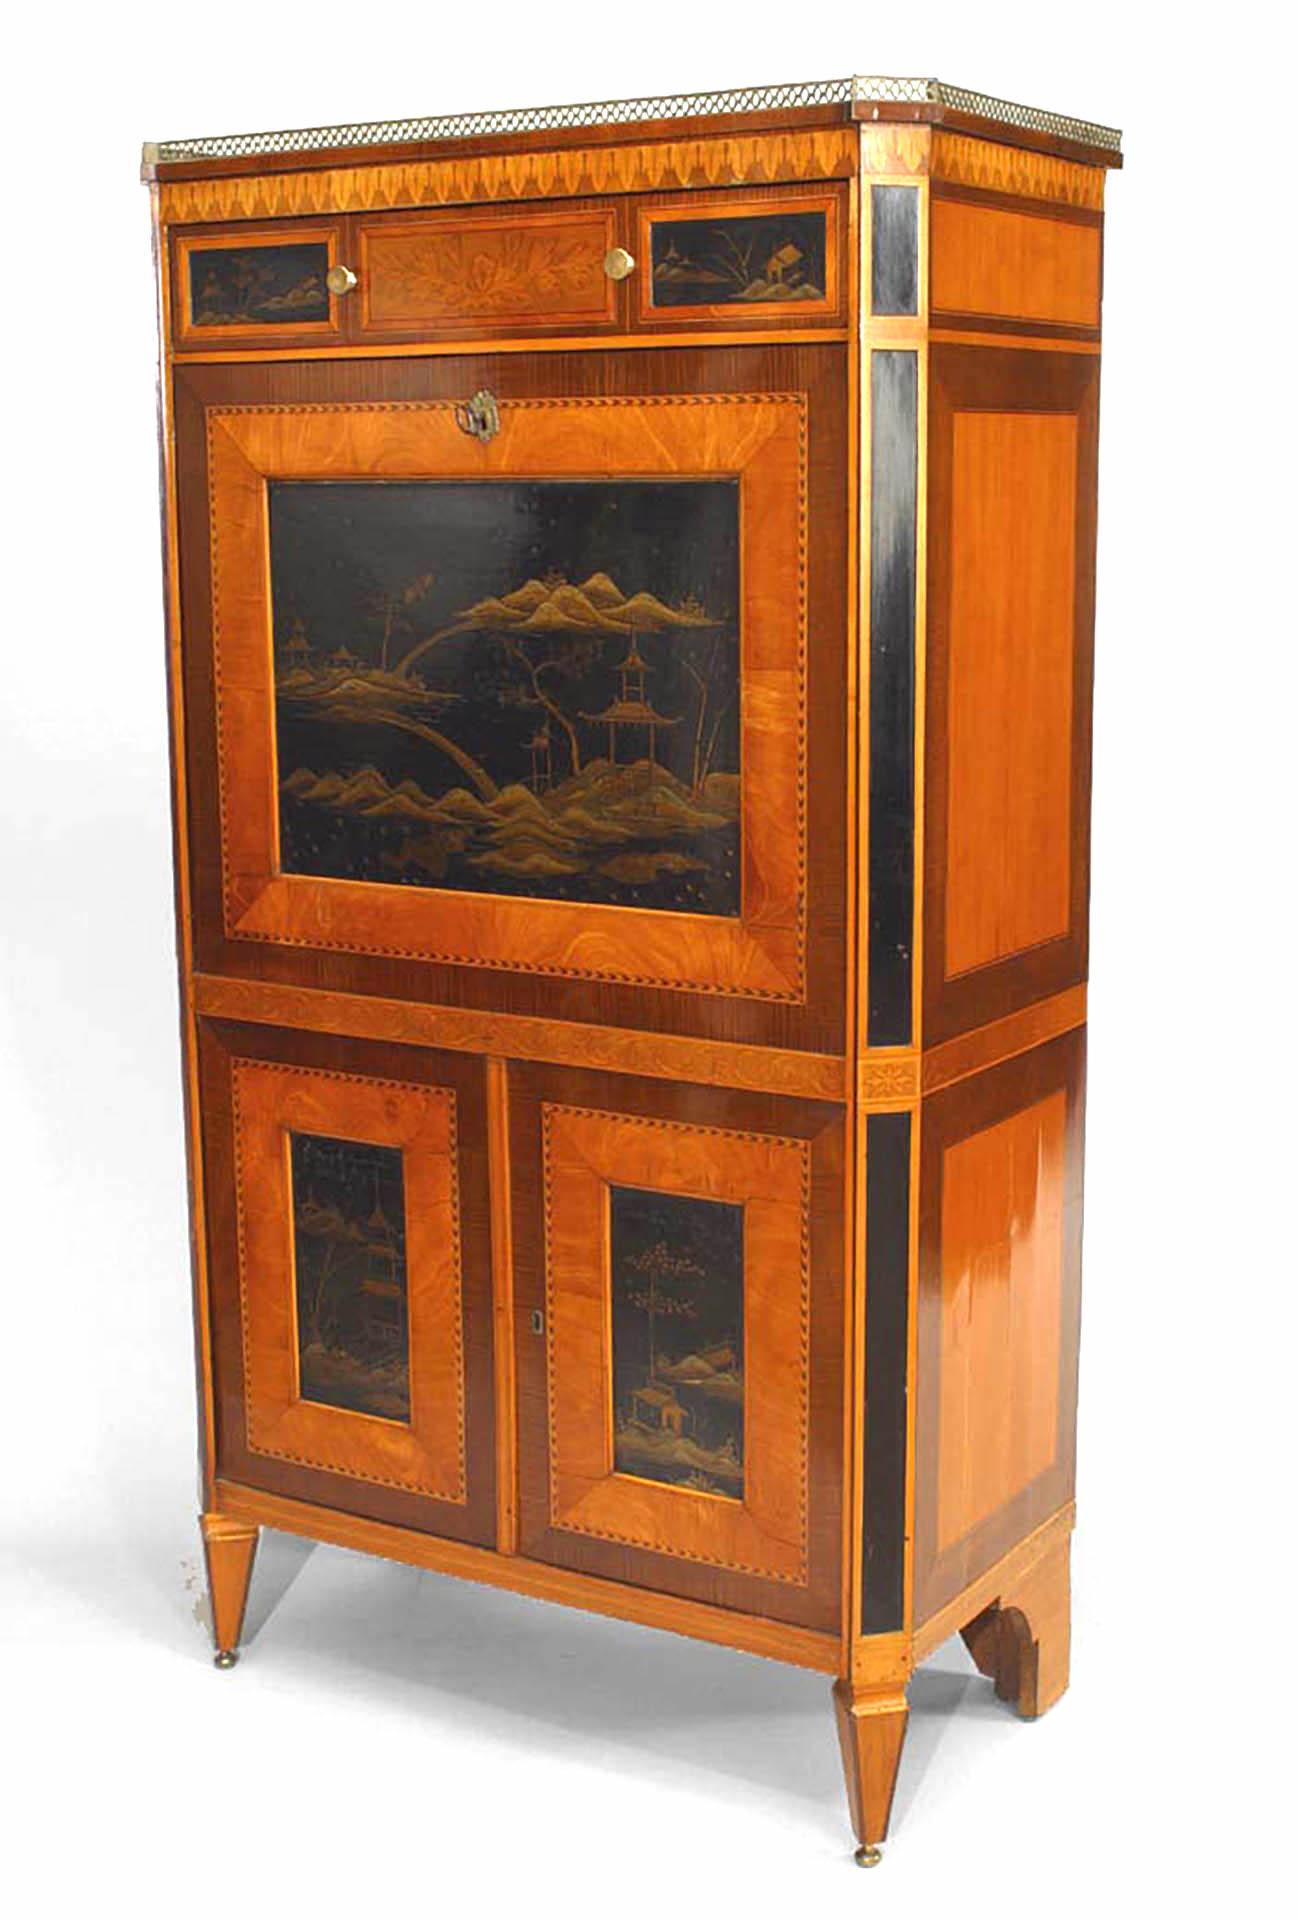 Continental Dutch-style (18/19th Century) satinwood and inlaid trimmed drop front desk with chinoiserie decorated lacquered panels and brass gallery
